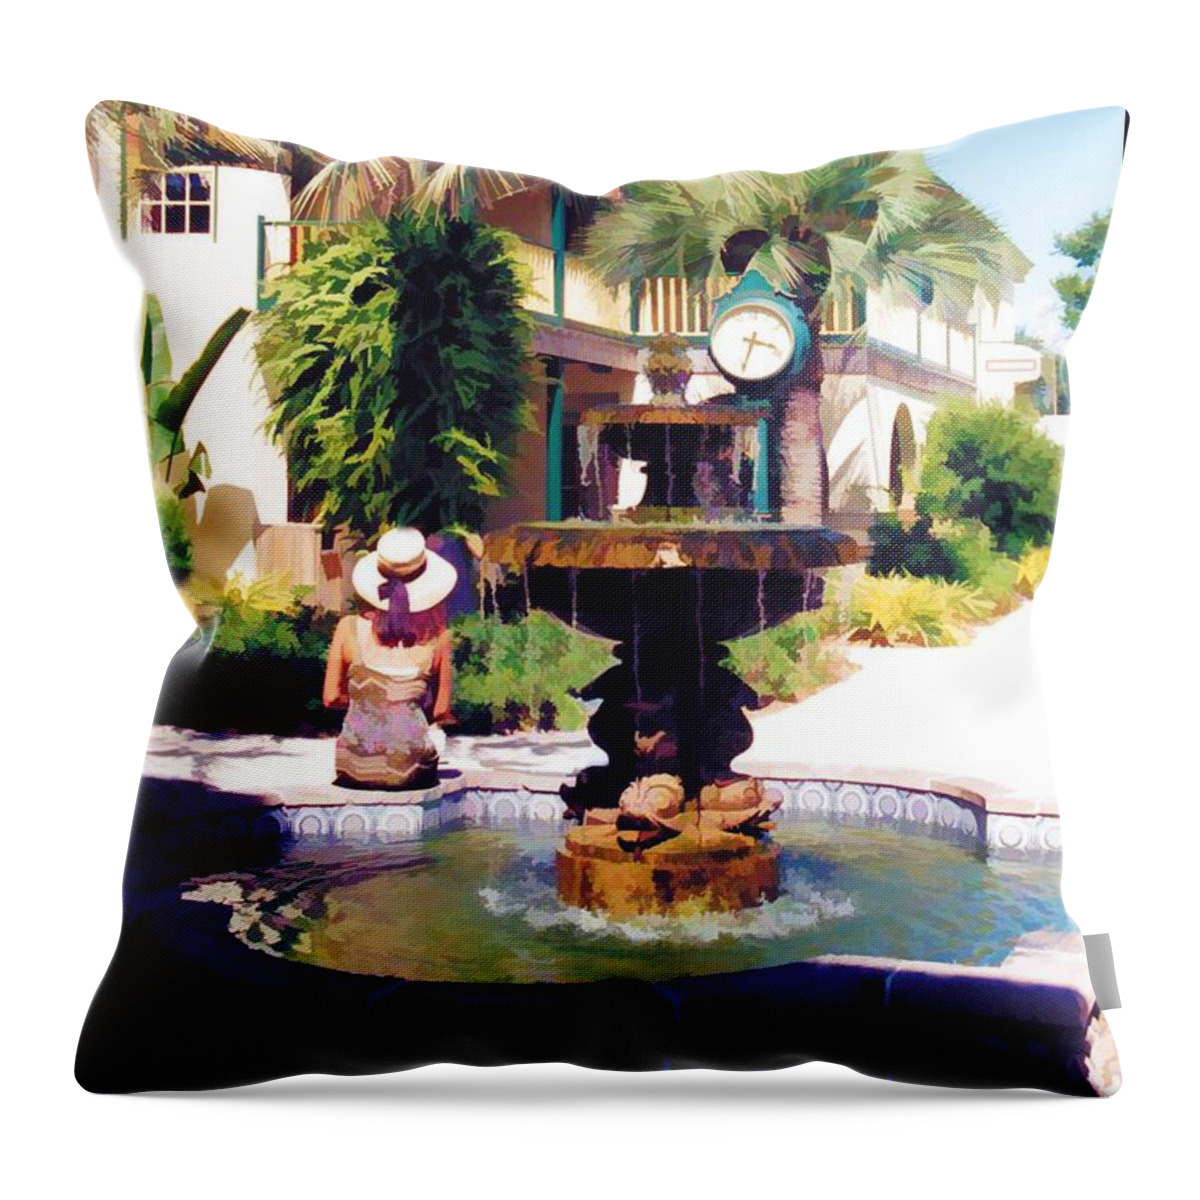 Landscapes Throw Pillow featuring the photograph St. Augustine Fountain by Jan Amiss Photography